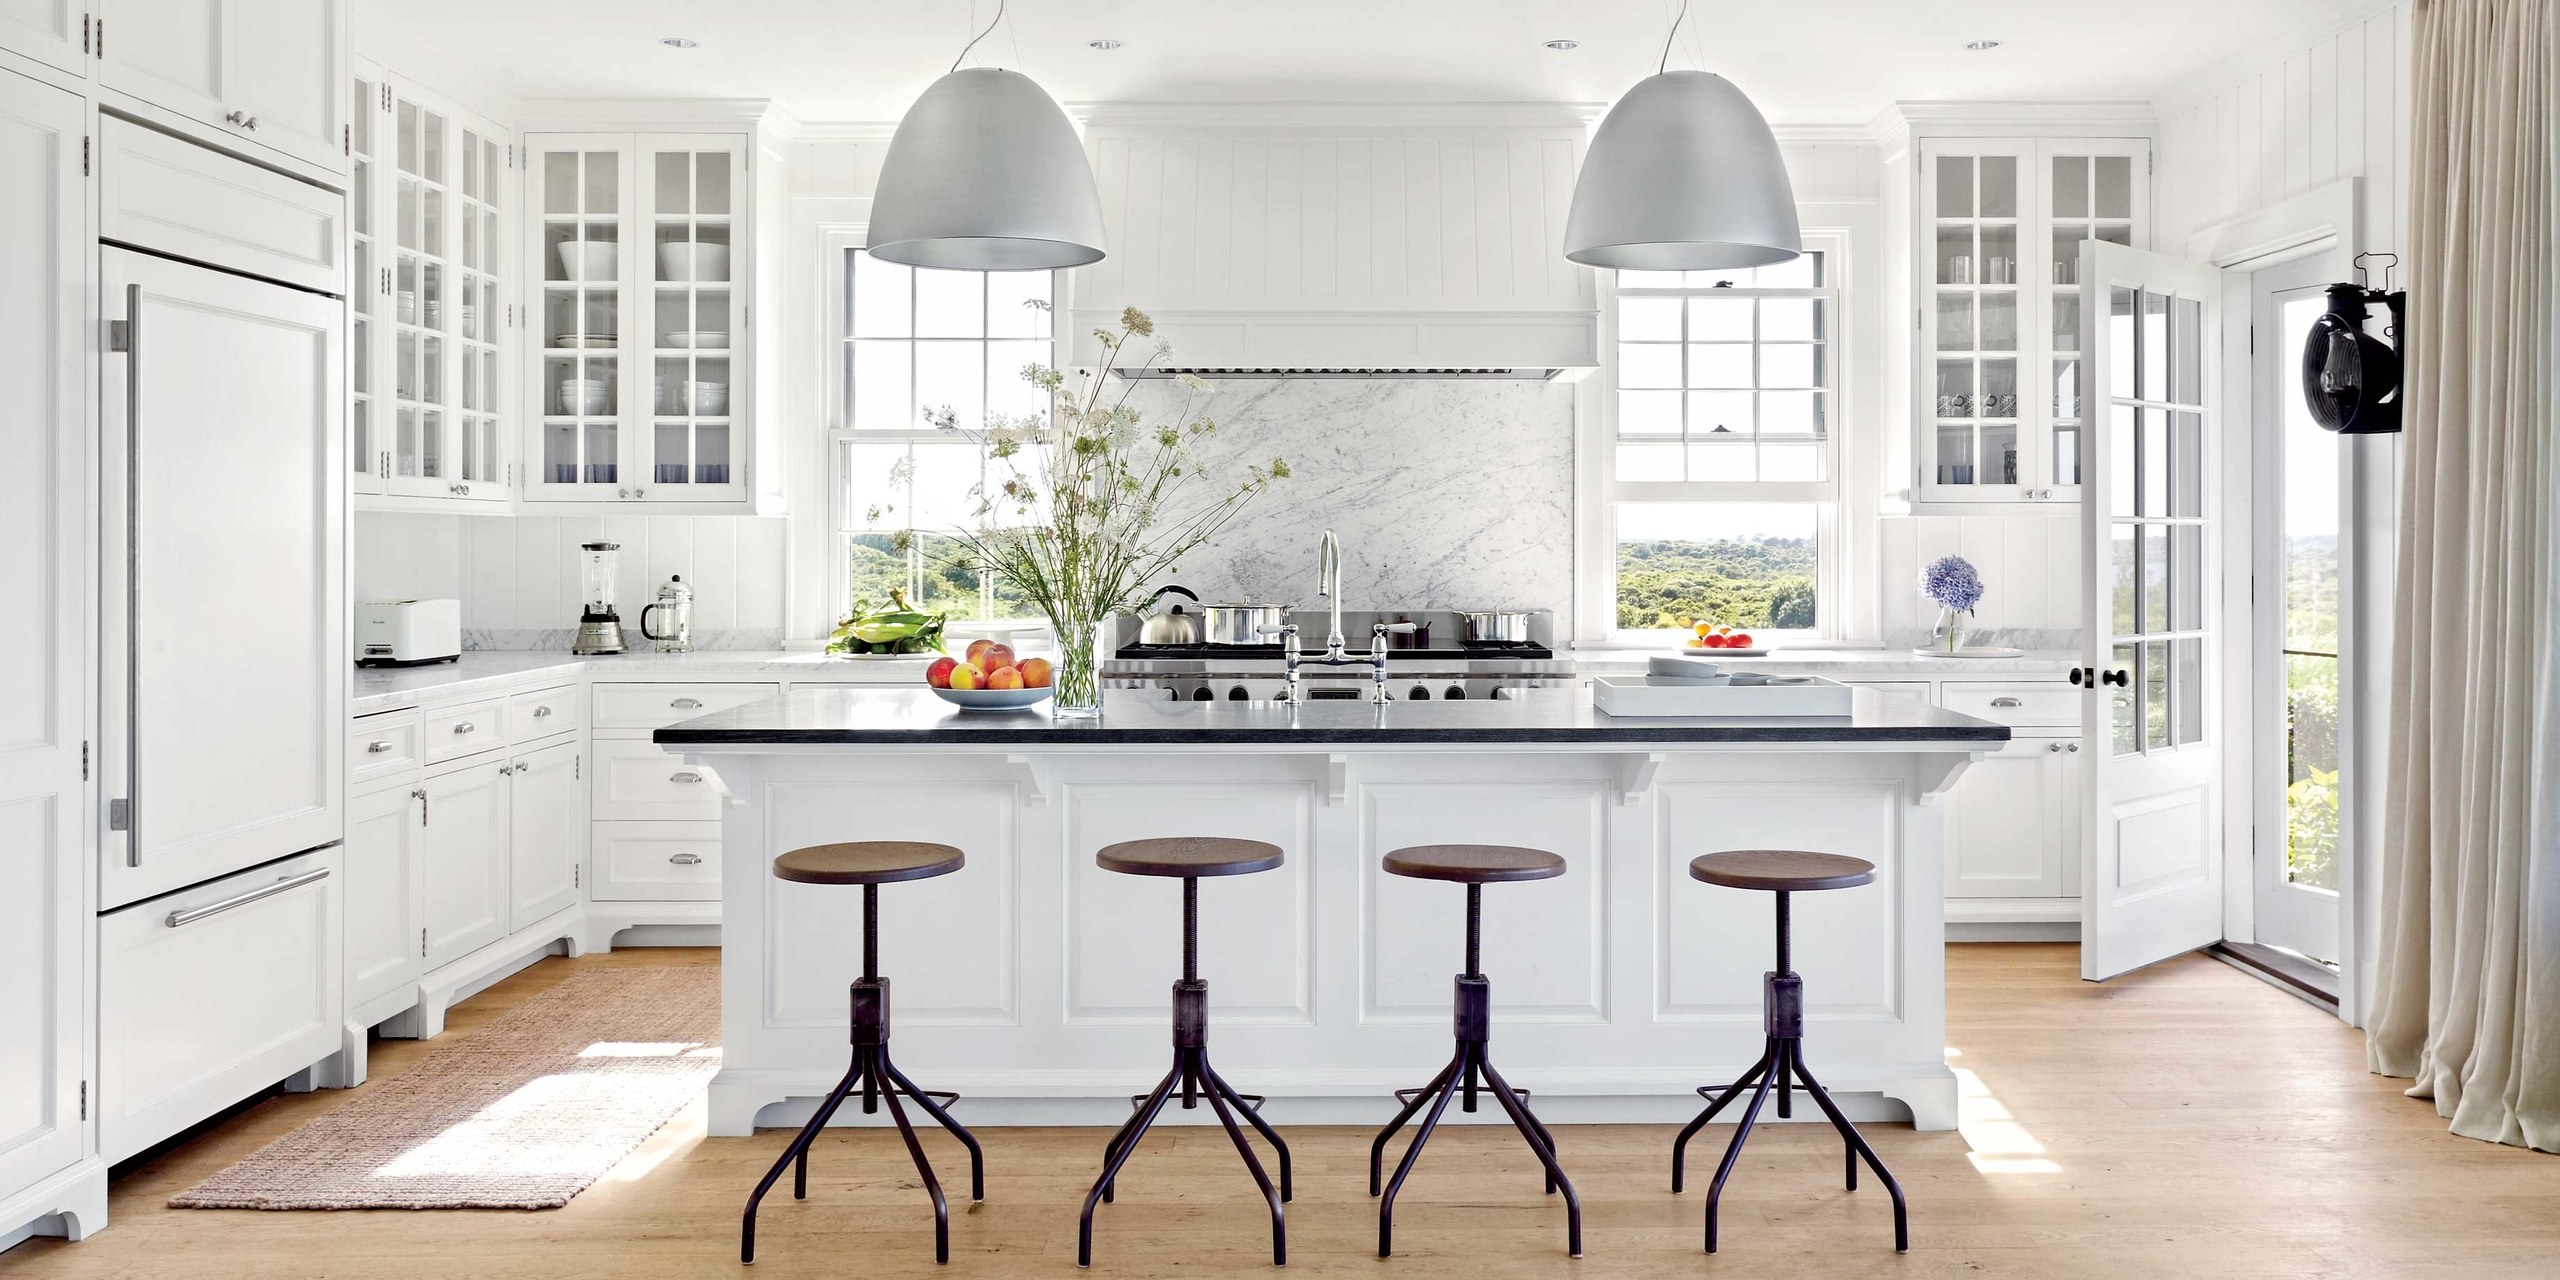 7 Kitchen Renovations That Increase Your Home's Value